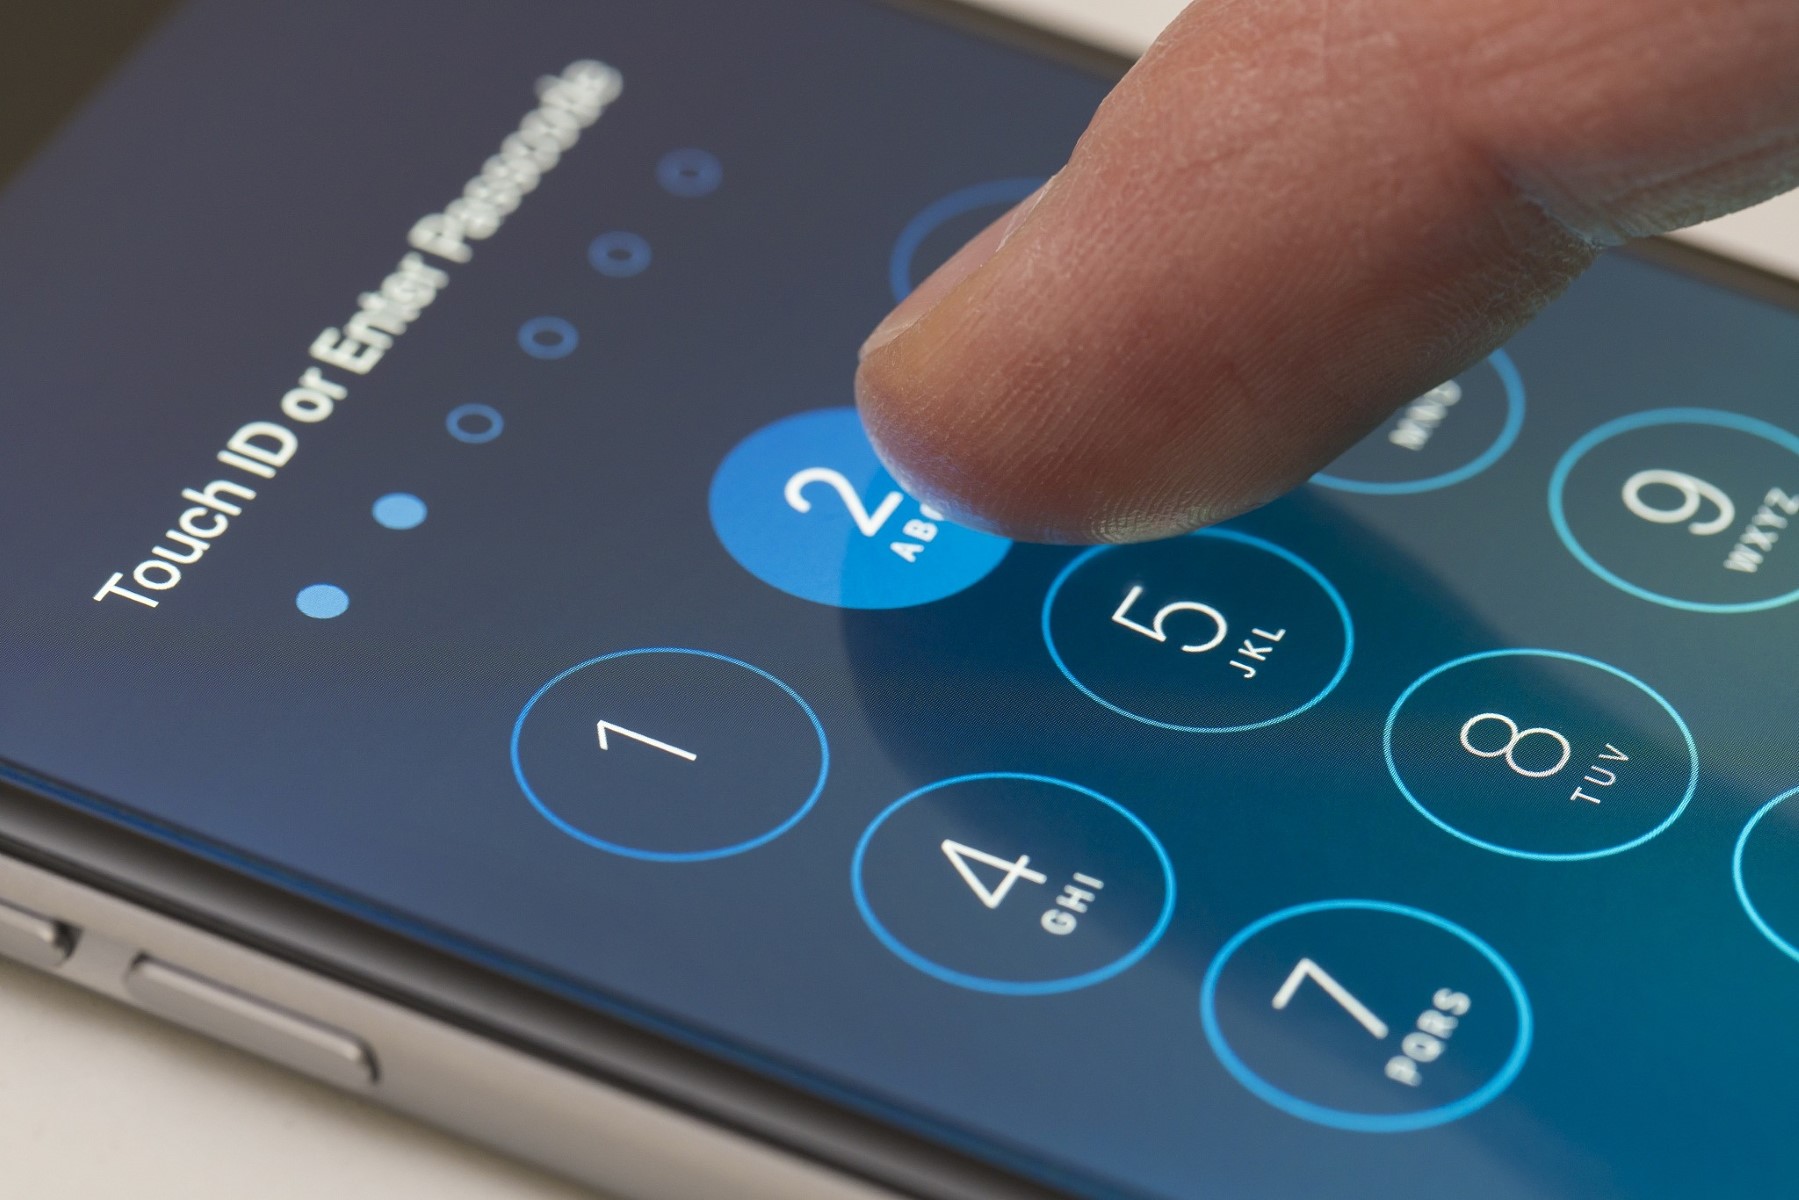 IPhone 11 Passcode Bypass: Steps To Unlock Your Device Without Passcode